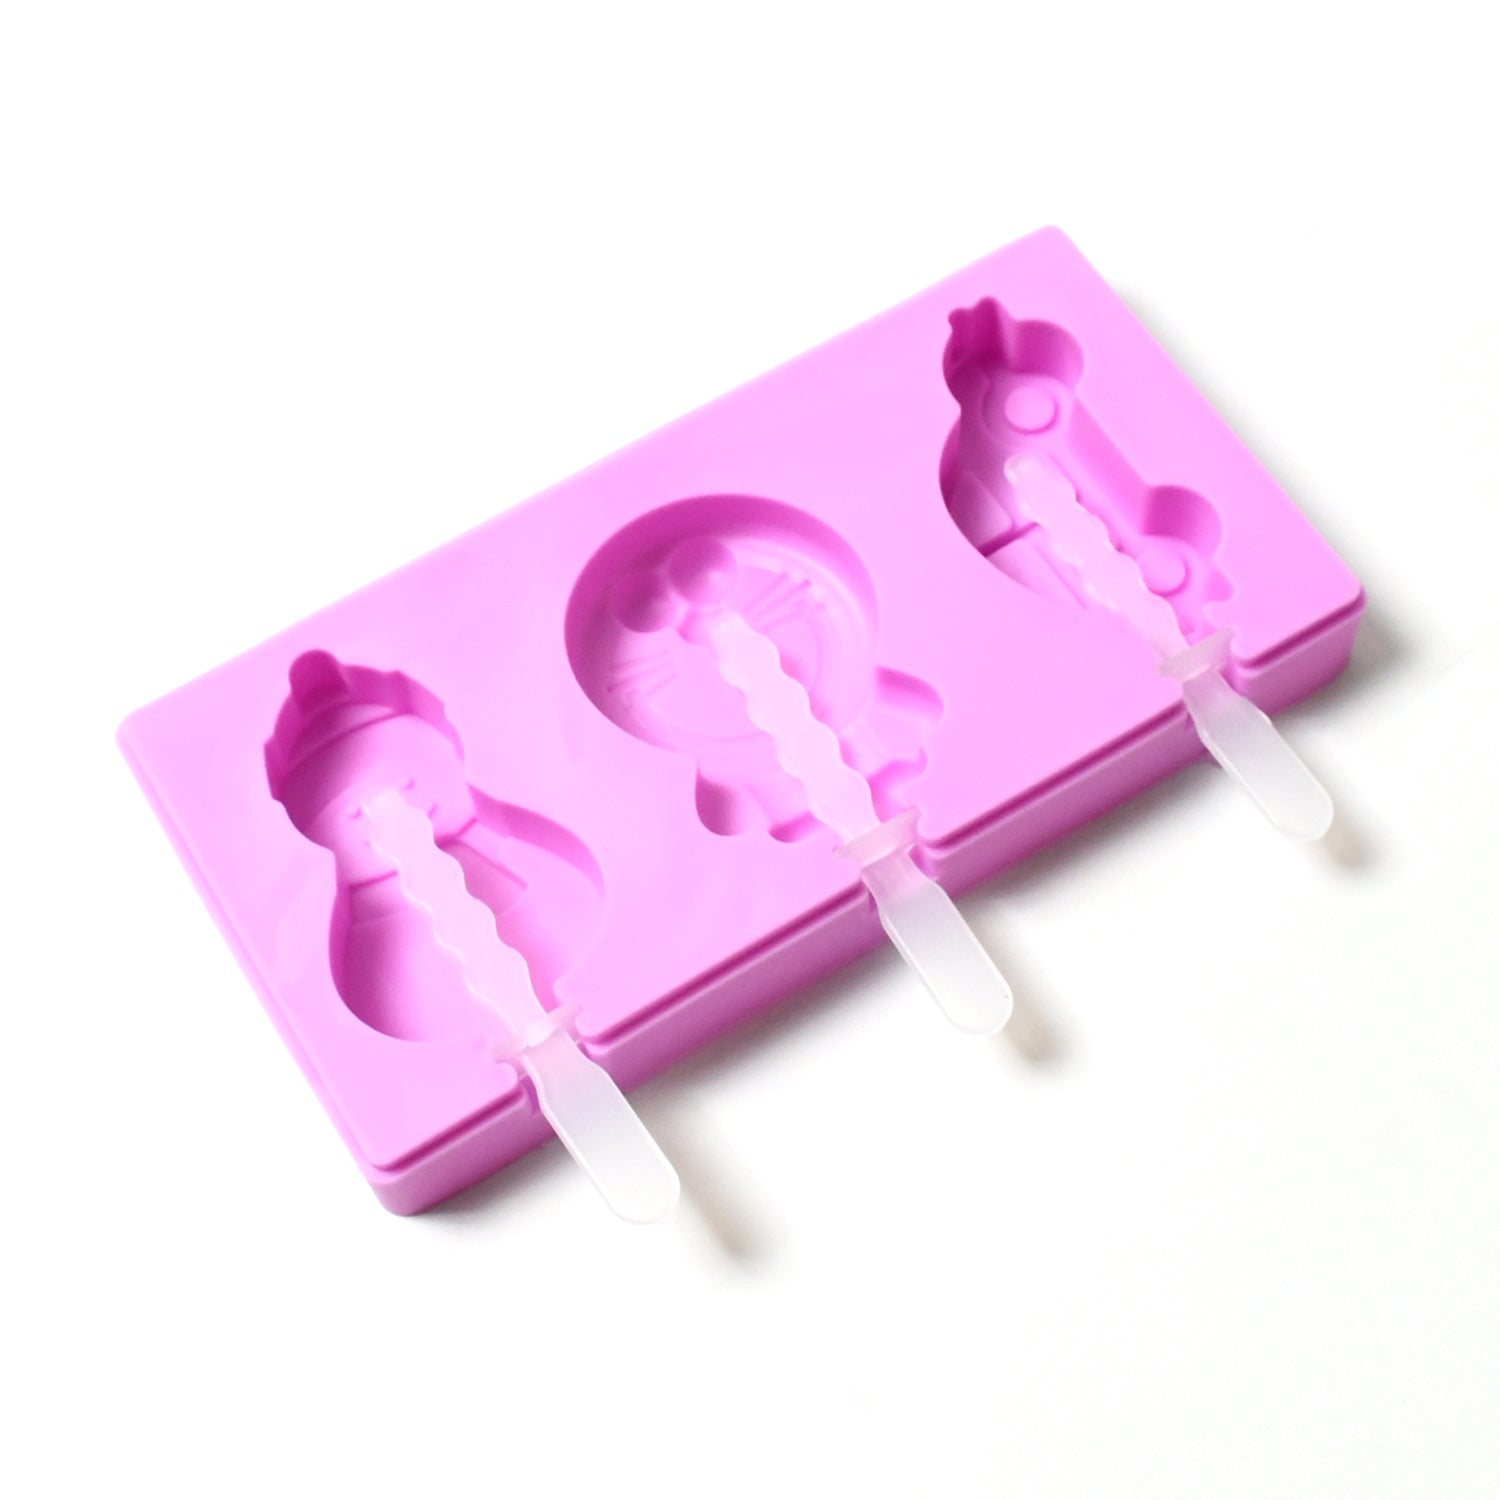 8188 Silicone Popsicle Molds, Reusable Ice Cream Molds With Sticks And Lids. A Must-Have Popsicle Mold For Summer. 